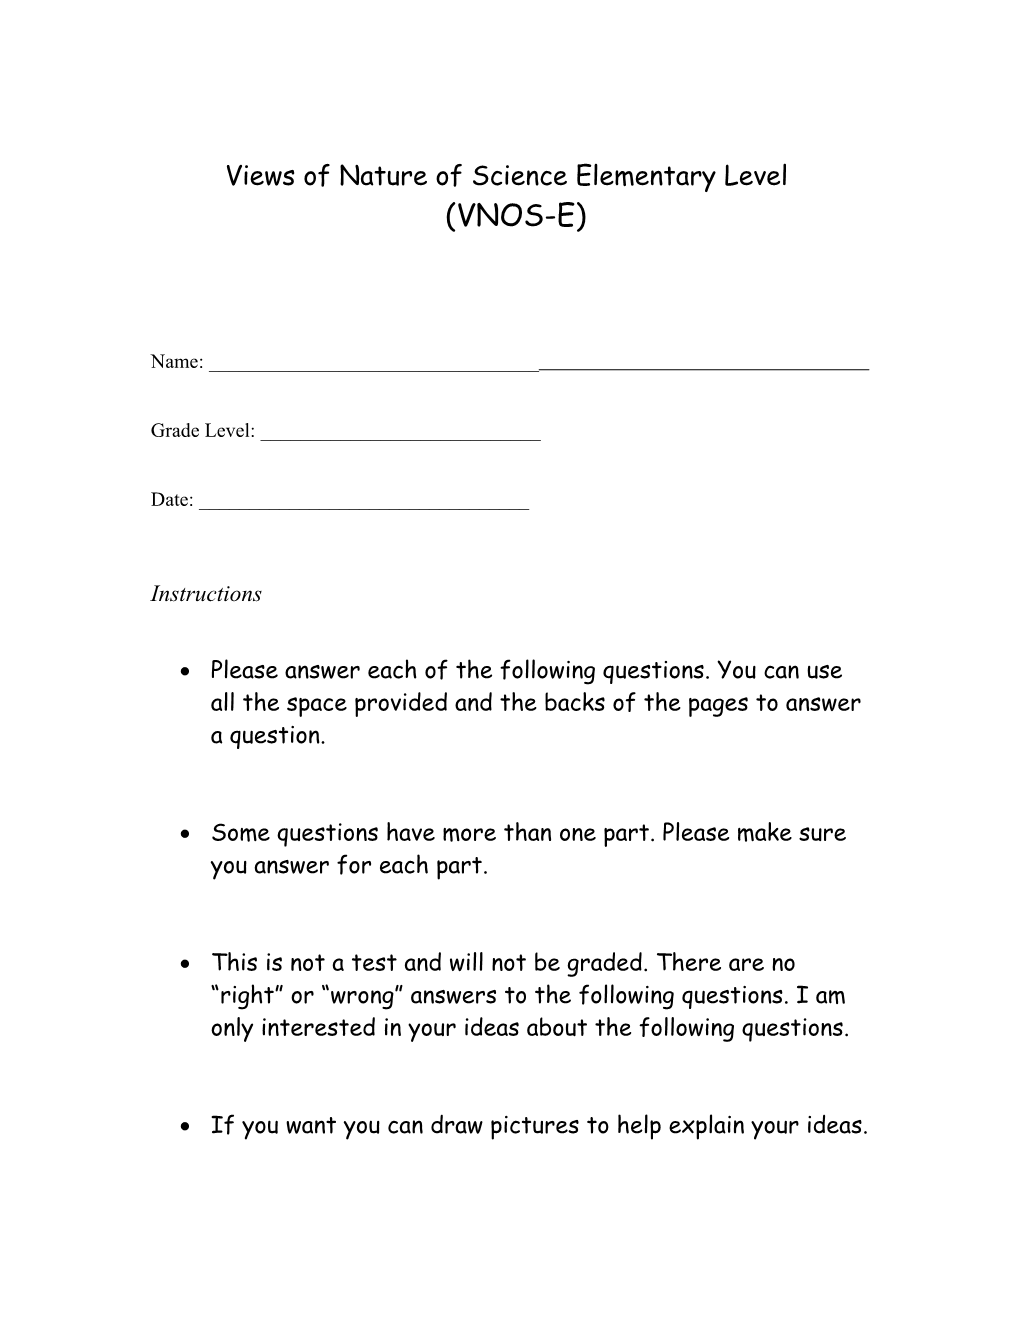 Views of Nature of Science Elementary School Version (VNOS D)